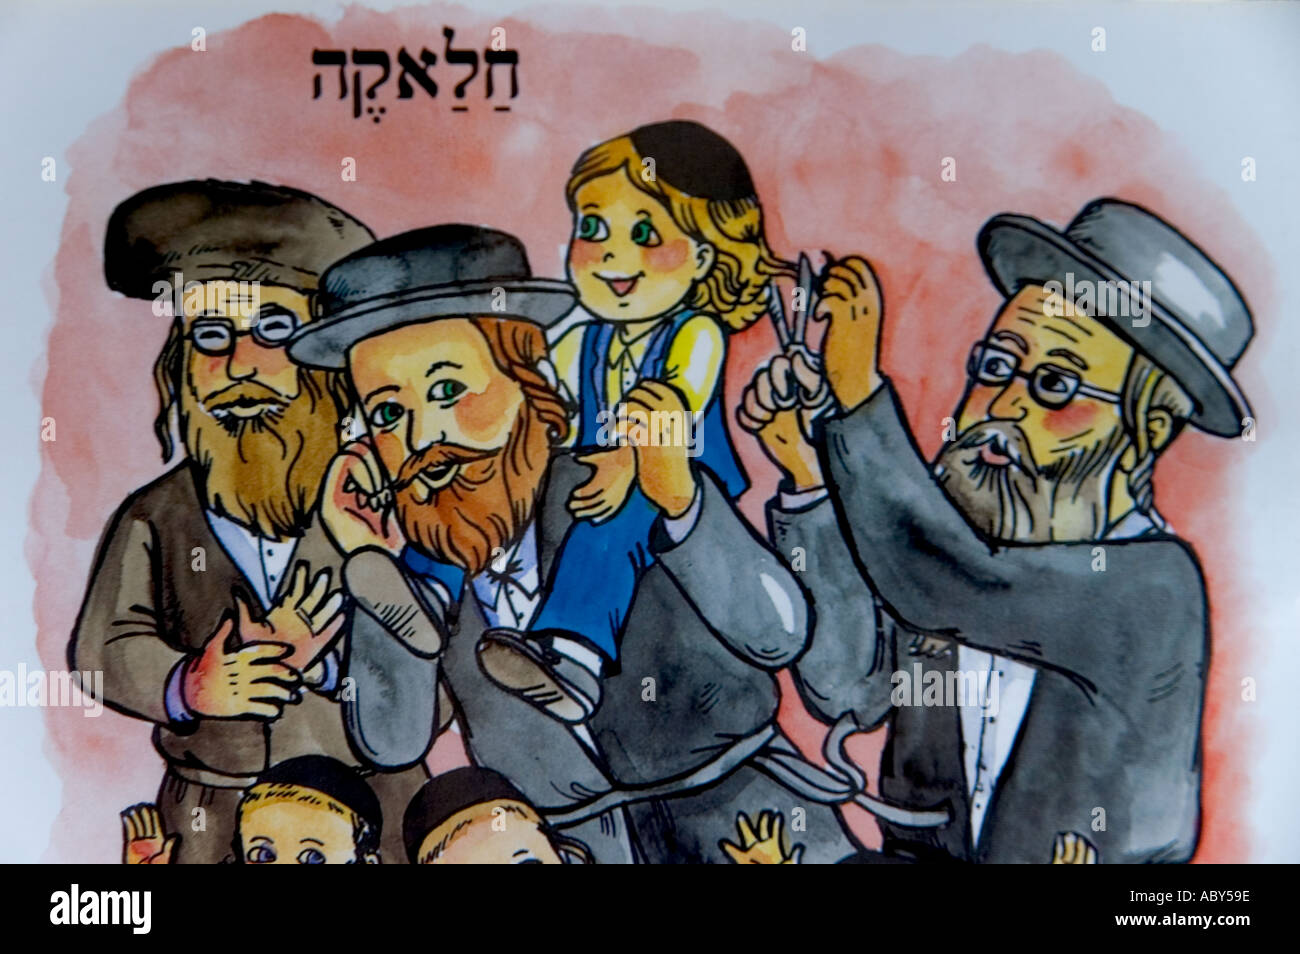 Israel Jerusalem Mea shearim Jewish Orthodox quarter drawing of ultra orthodox jews dancing with a child as an illustration of the Halake ceremony first child haircut in a children s book Stock Photo